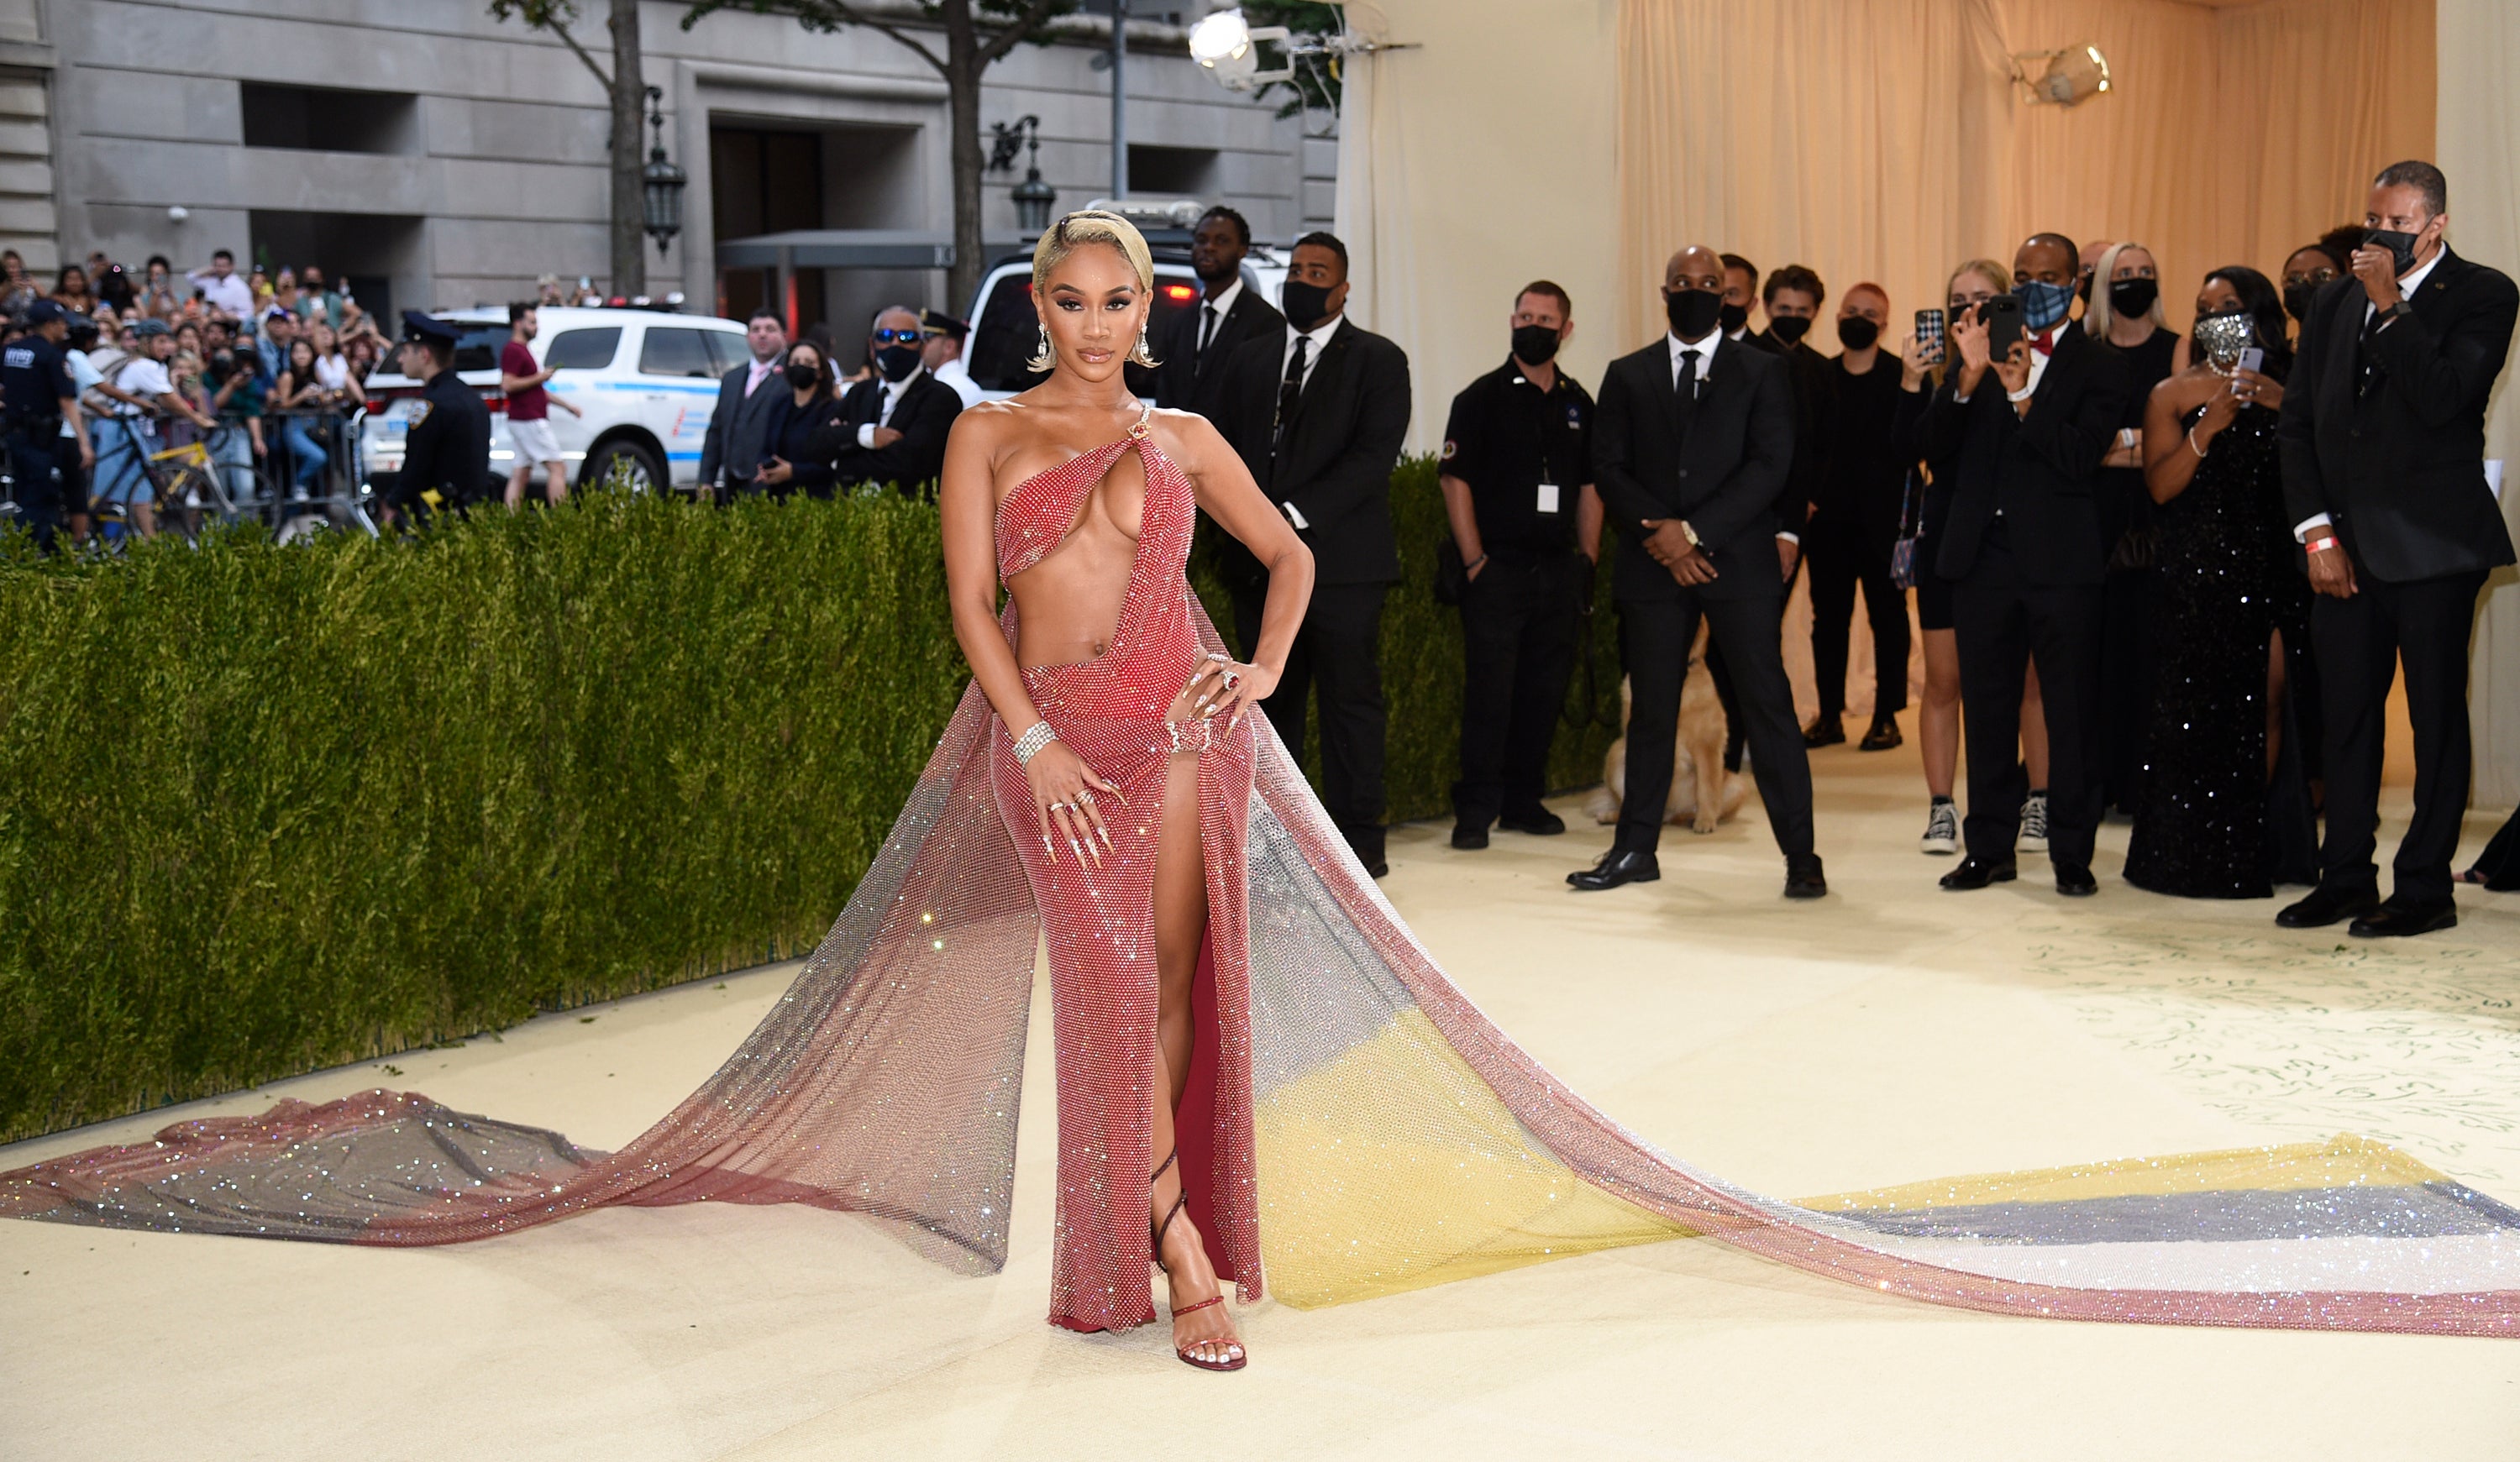 Saweetie wore a Valentino dress split up the thigh (Evan Agostini/Invision/AP)